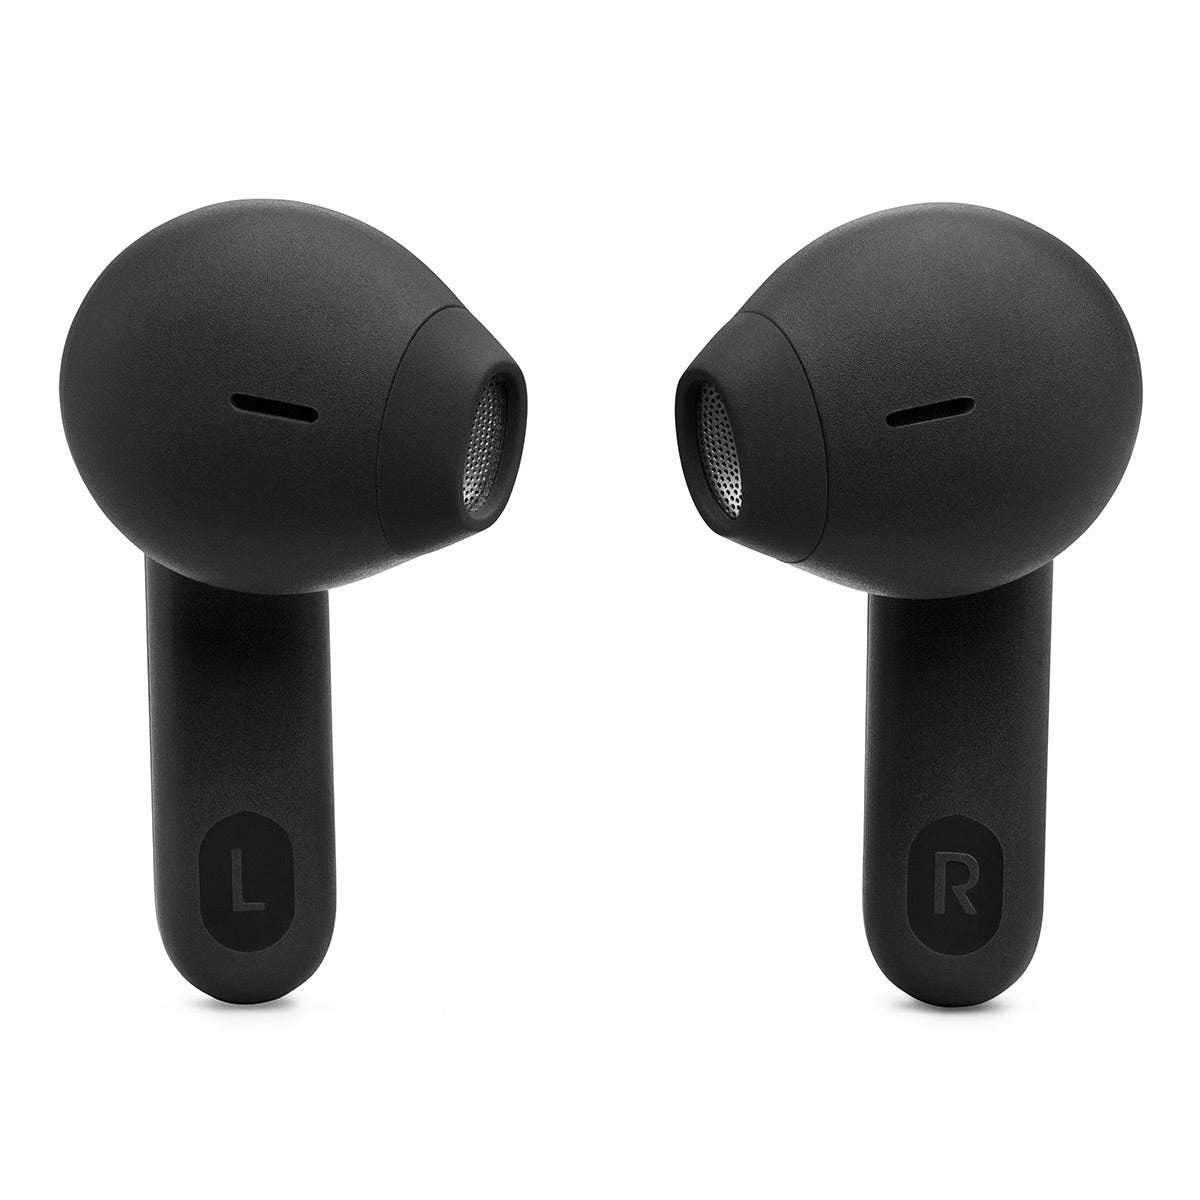 JBL Tune Flex True Wireless Noise Cancelling Earbuds with Bluetooth 5.2 (Black)